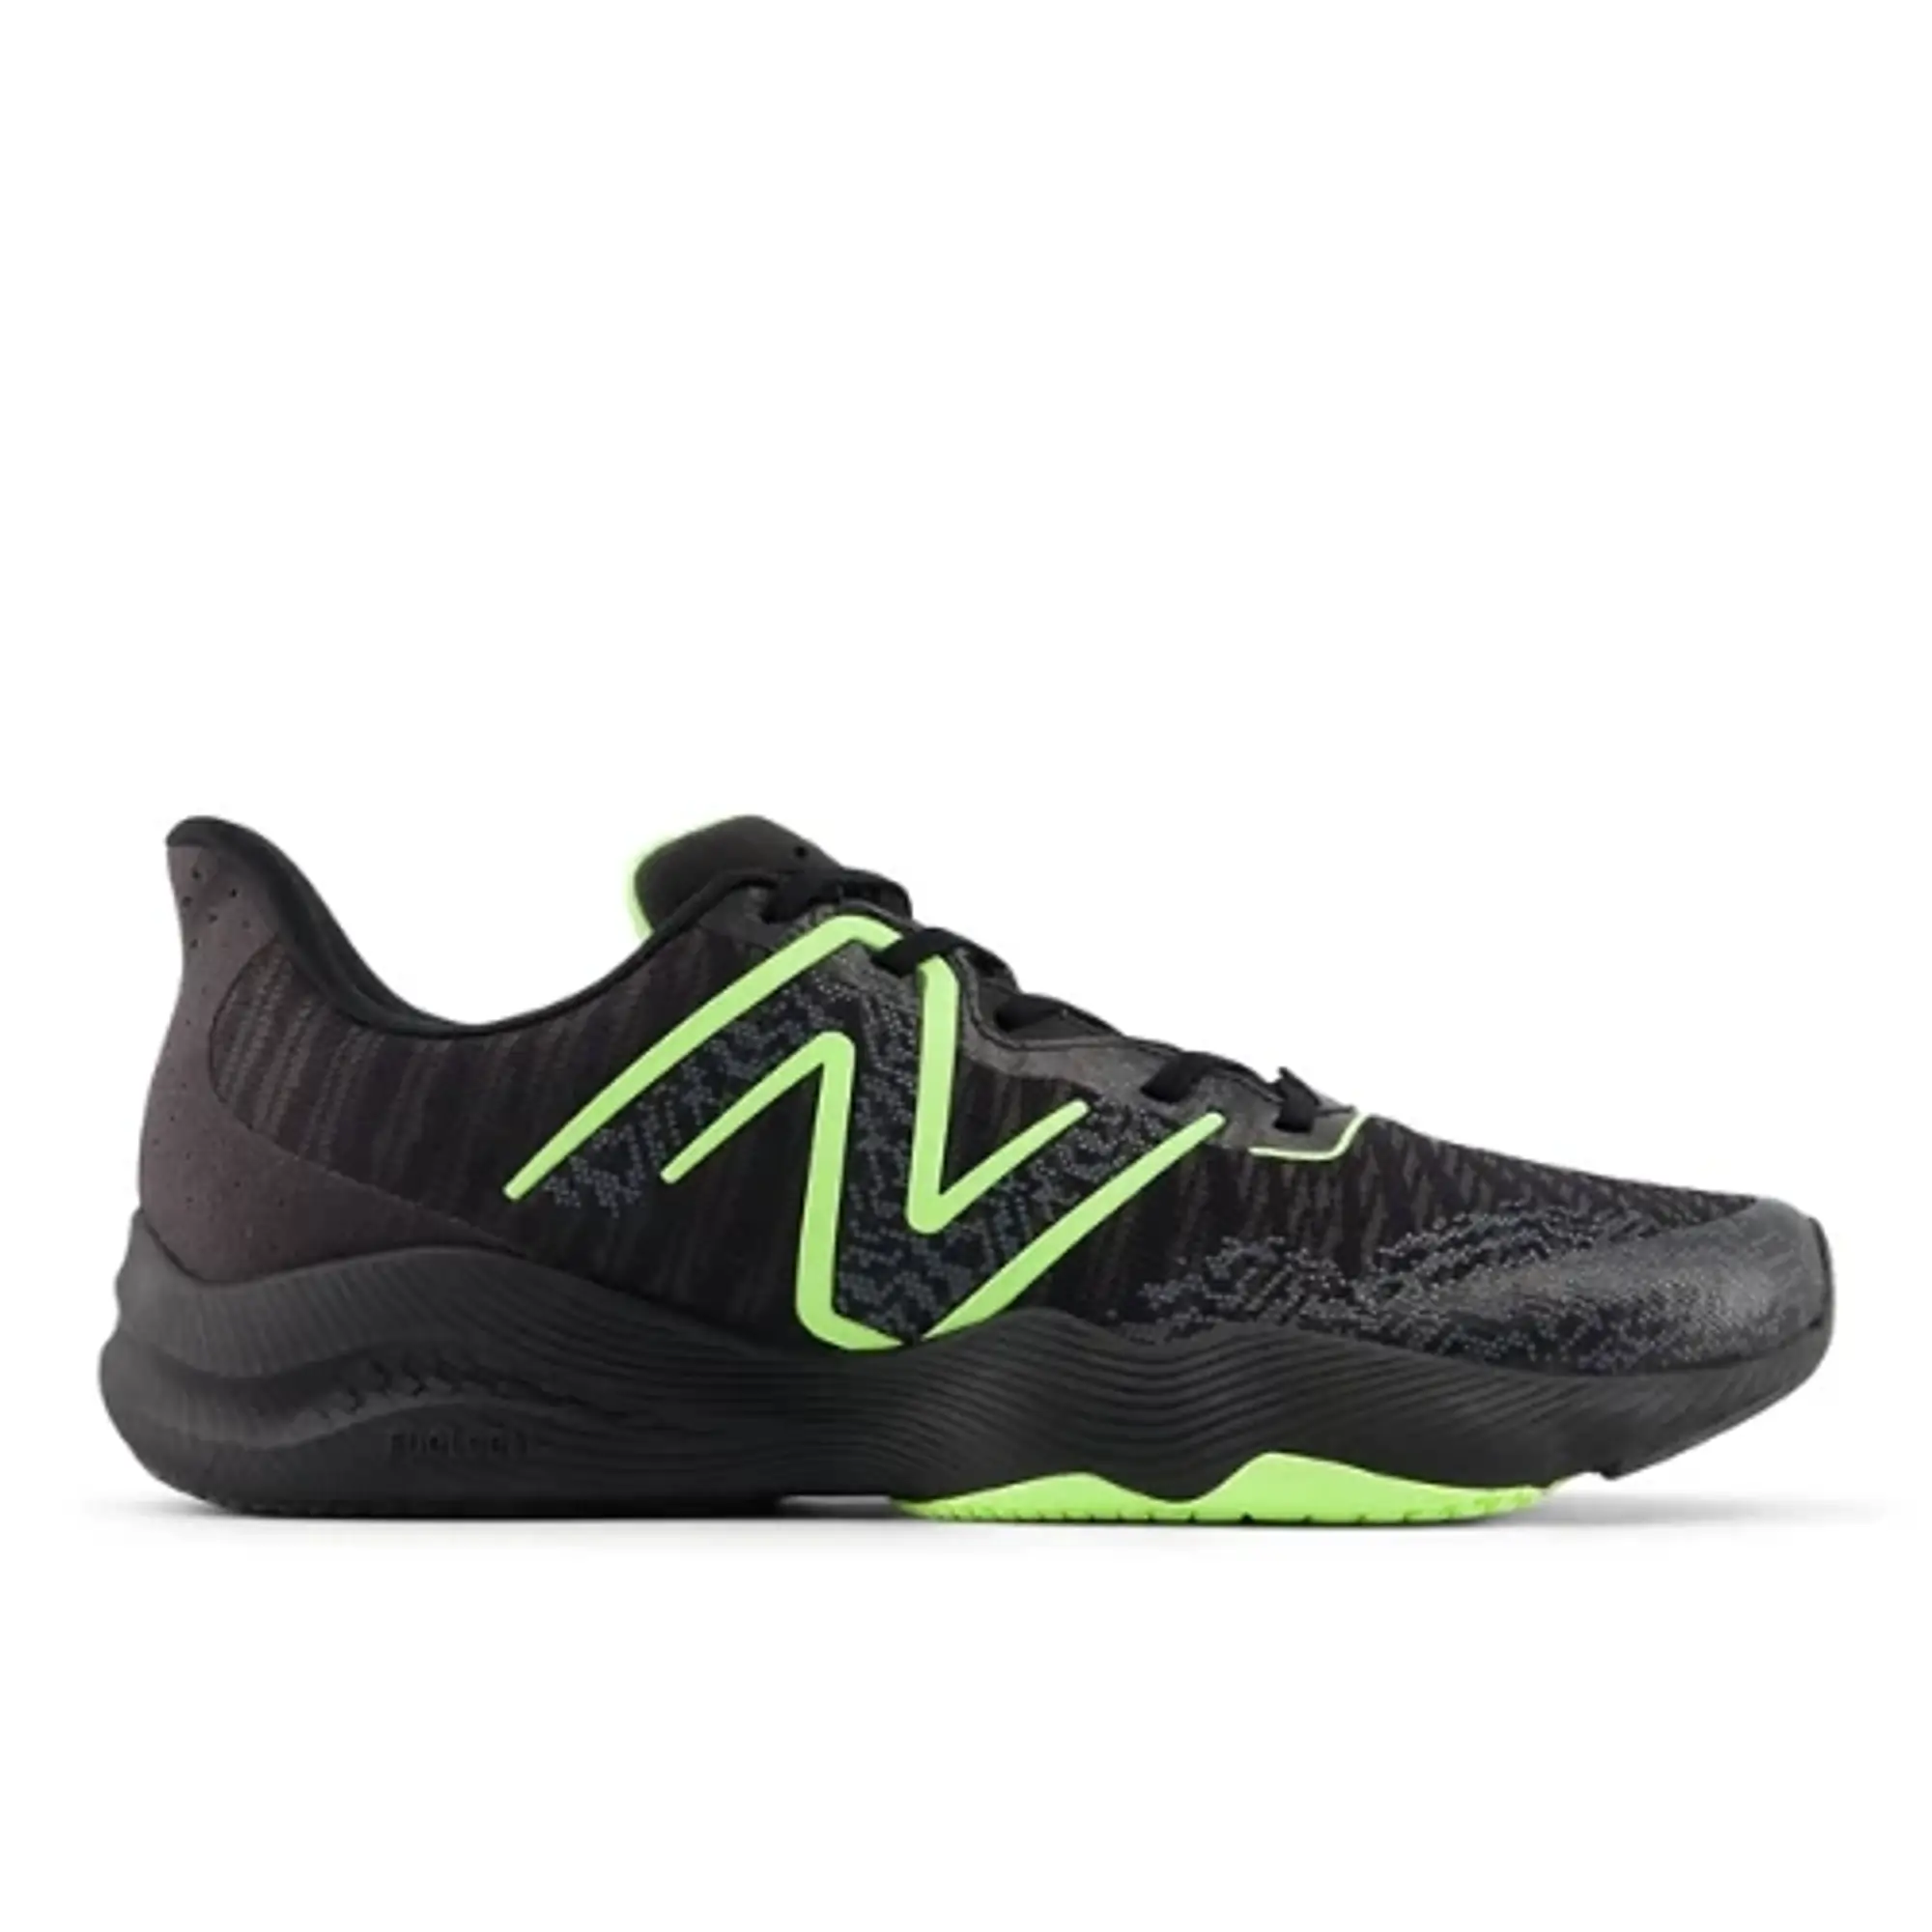 New Balance Men's FuelCell Shift TR v2 in Black/Green Textile